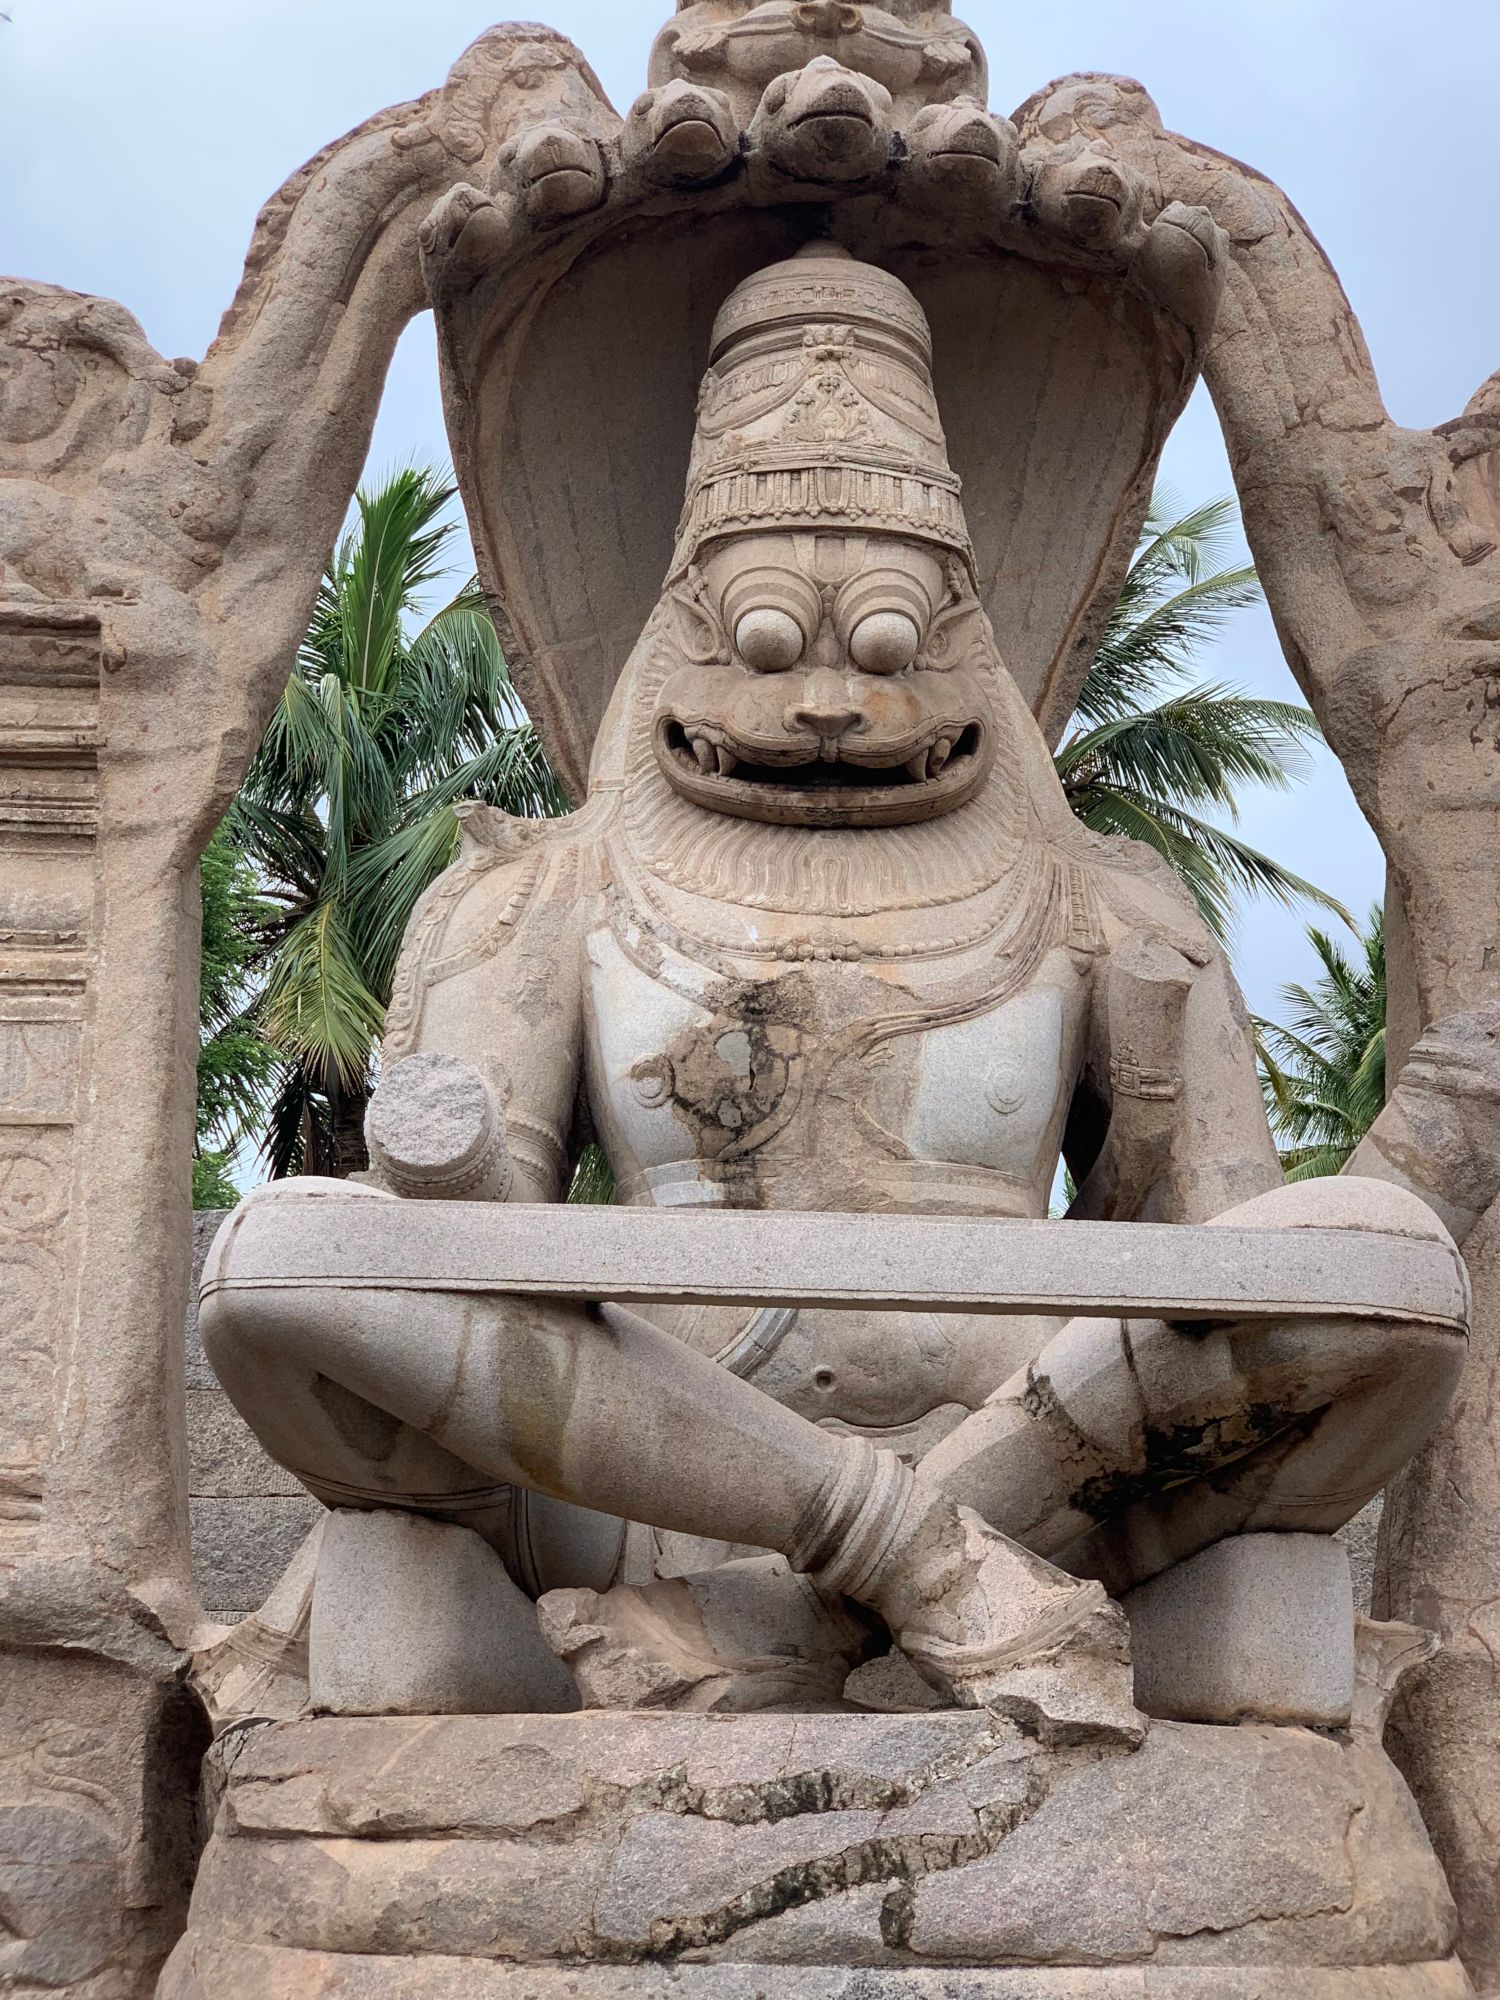 15th century sculpture of Narasimha, seen with similar props to ones we use now